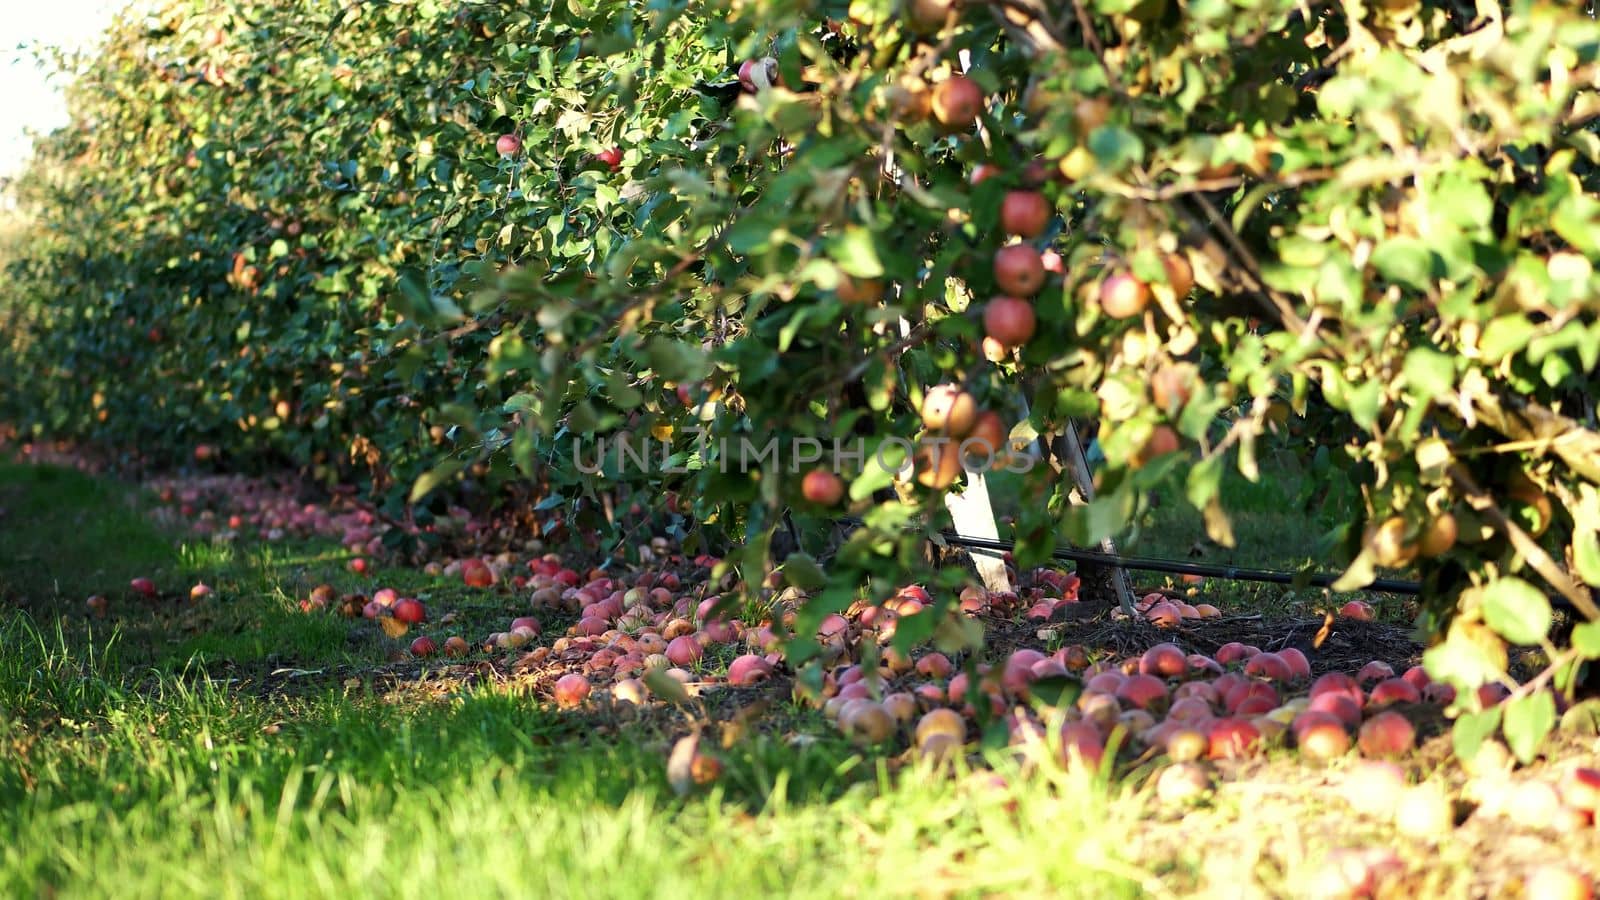 close up, Many ripe fallen apples lying on the ground under apple trees in an orchard. early autumn. harvest of apples on the farm. by djtreneryay